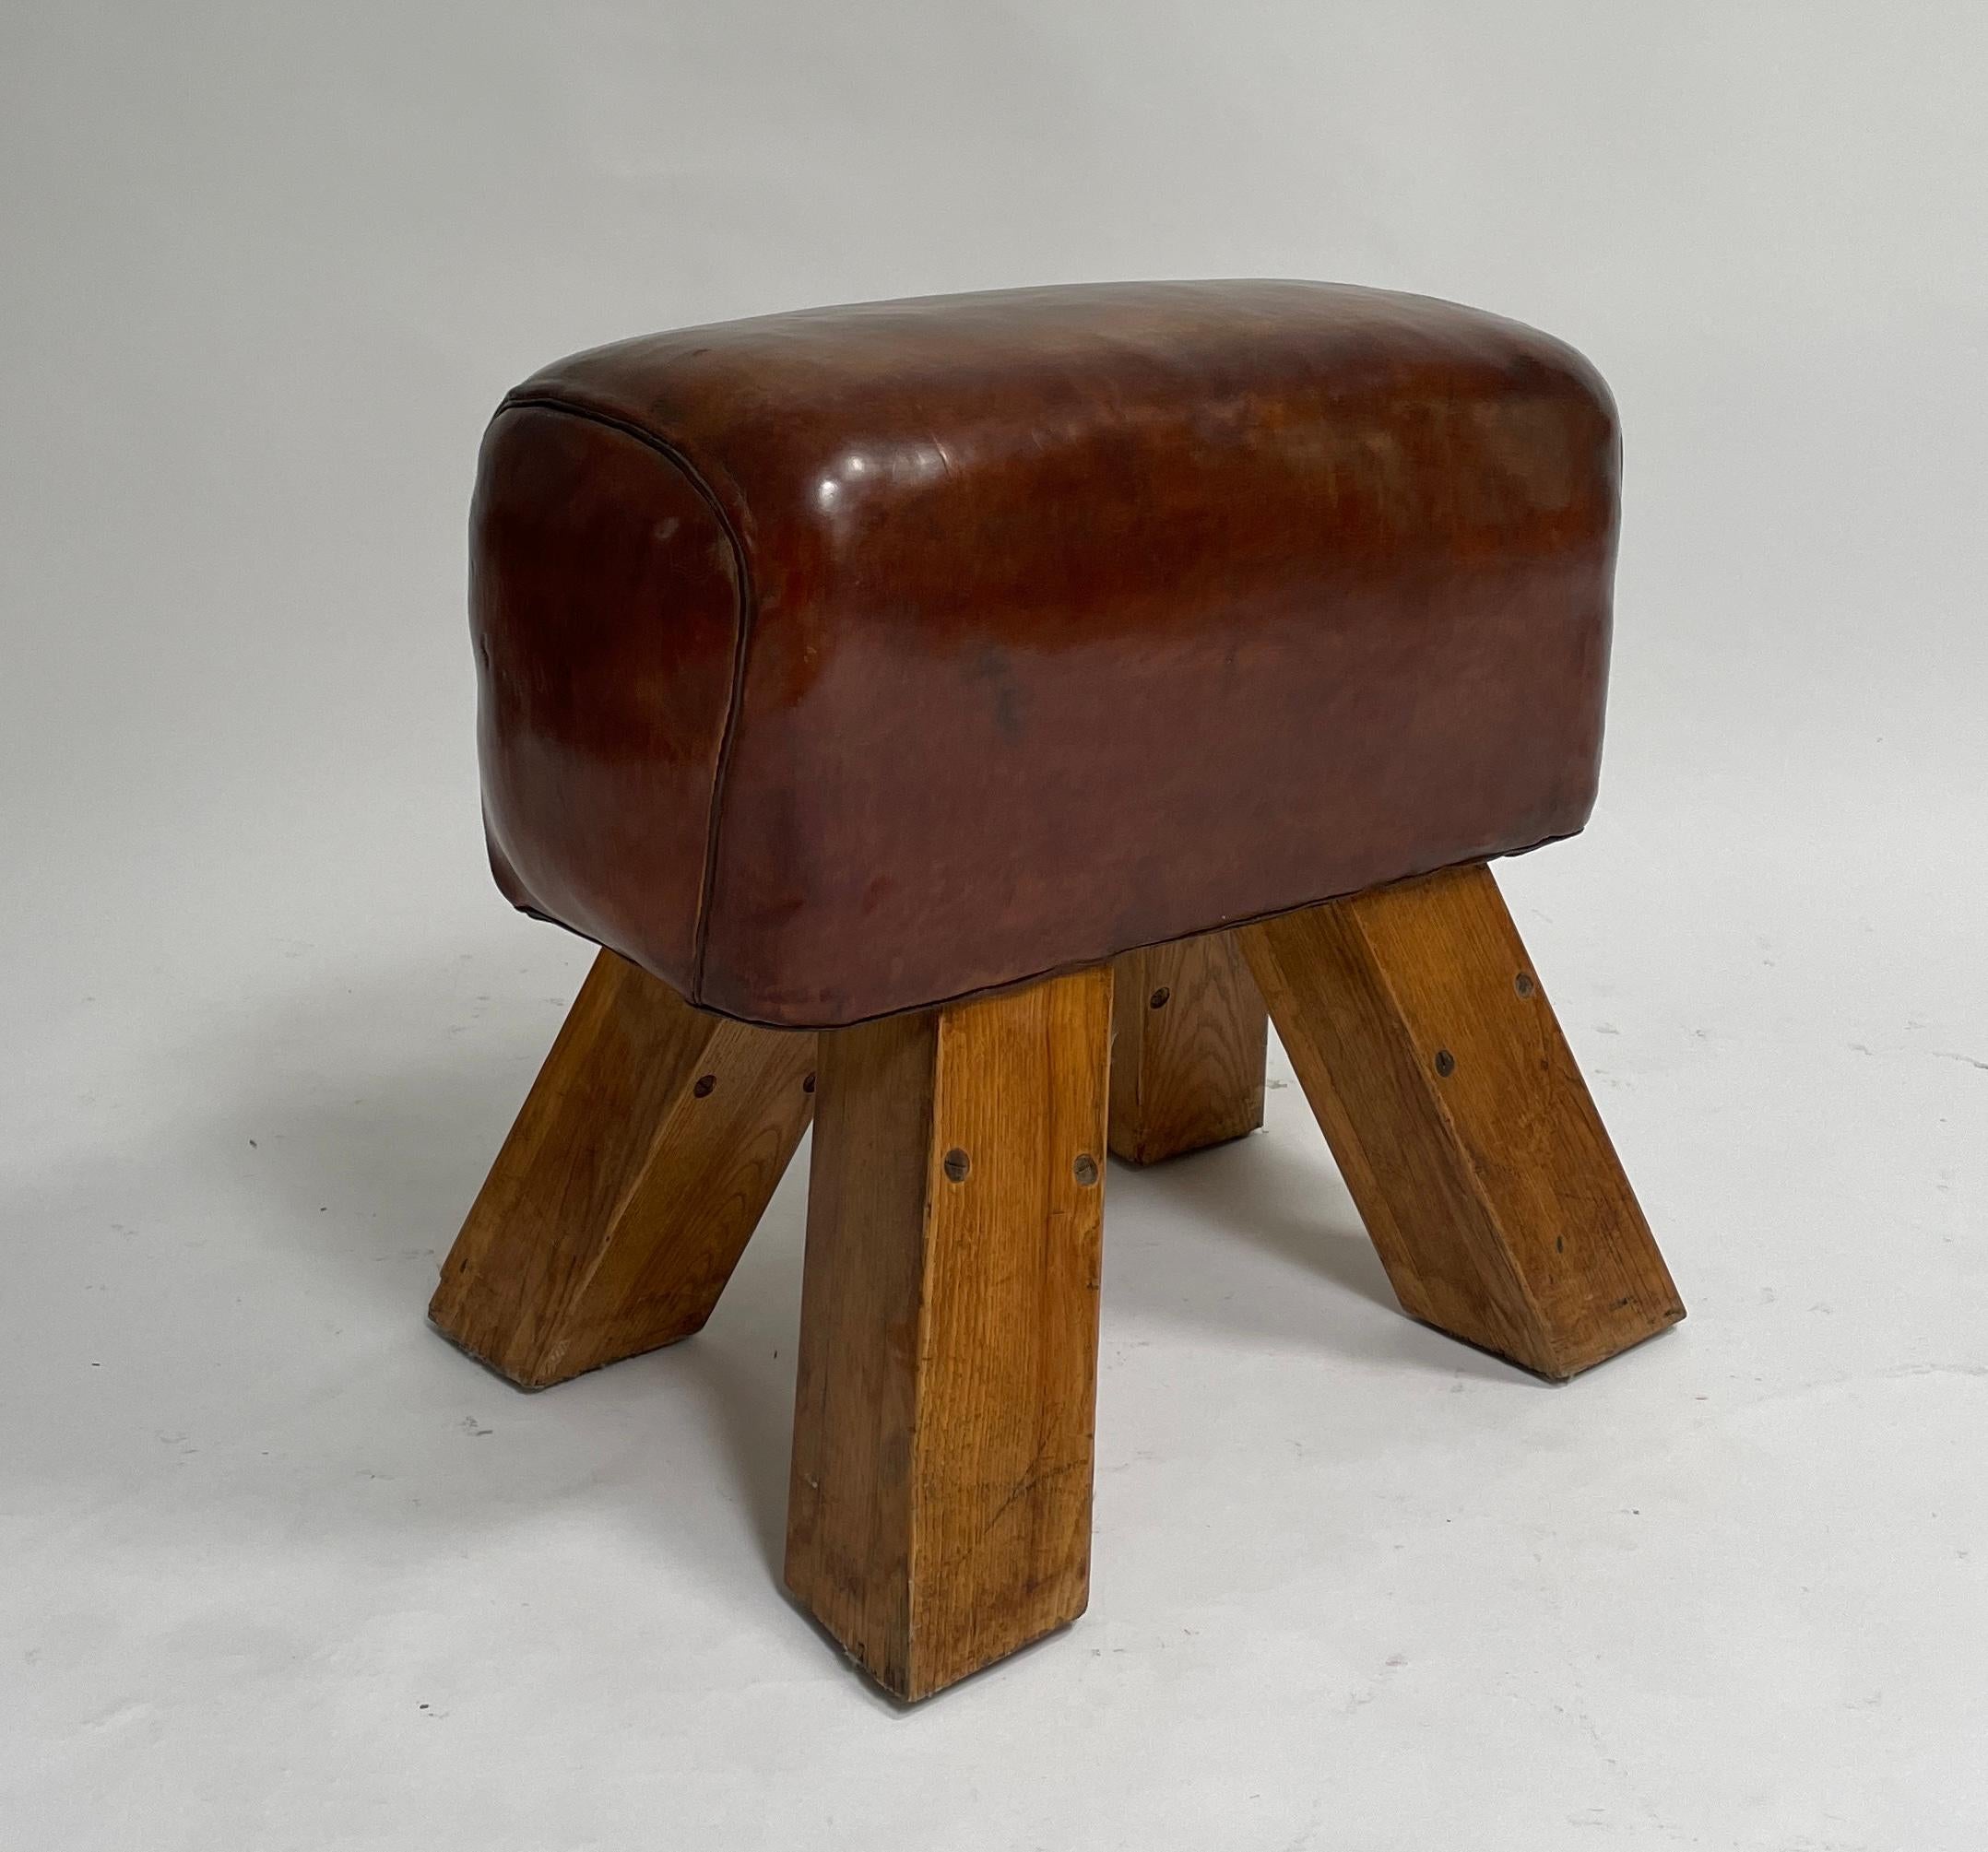 A beautiful piece from the 1940s. This pommel horse serves well as a small bench and a big conversation piece. The leathers patina is rich in history.
An authentic piece from a European gym.